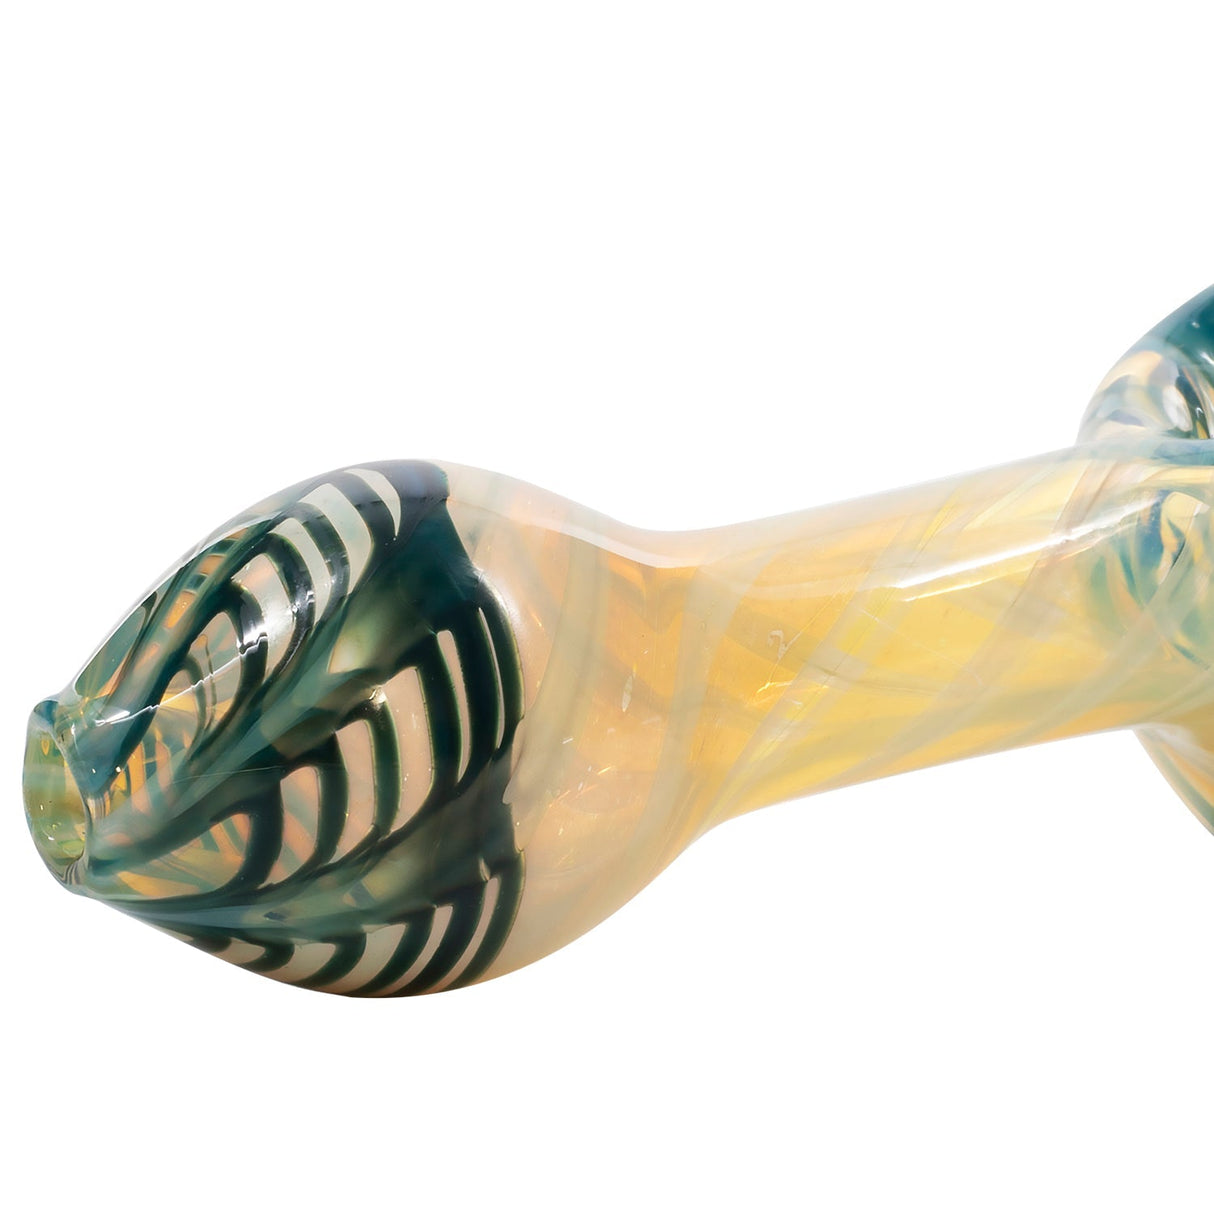 LA Pipes Twisty Cane Spoon Glass Pipe in Assorted Colors, Borosilicate, USA Made - Side View